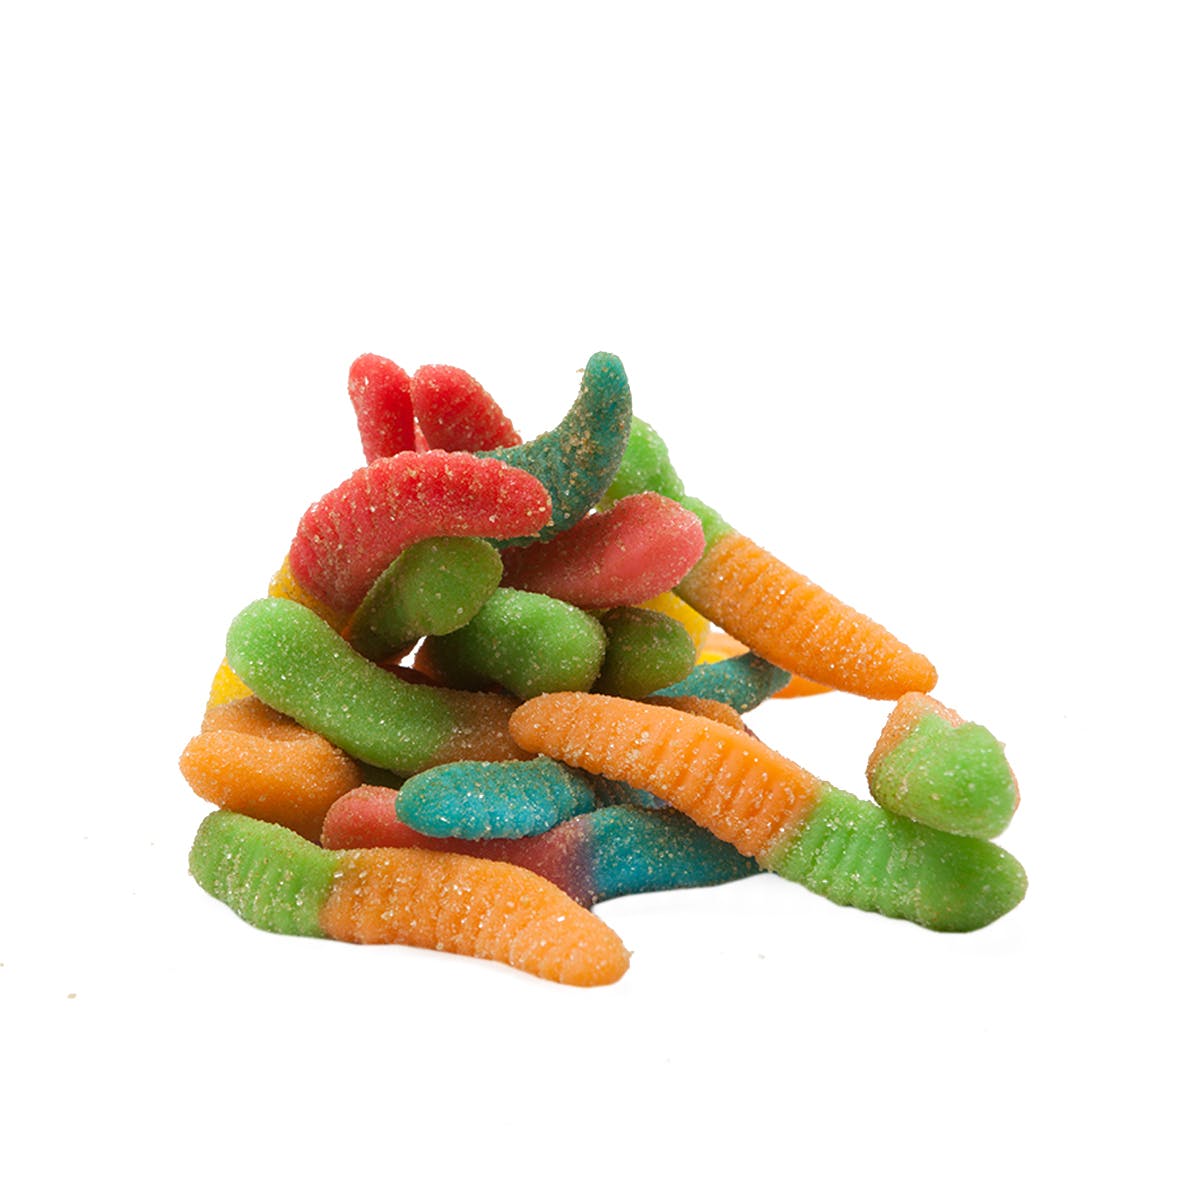 marijuana-dispensaries-the-grand-collective-in-lake-elsinore-space-worms-150mg